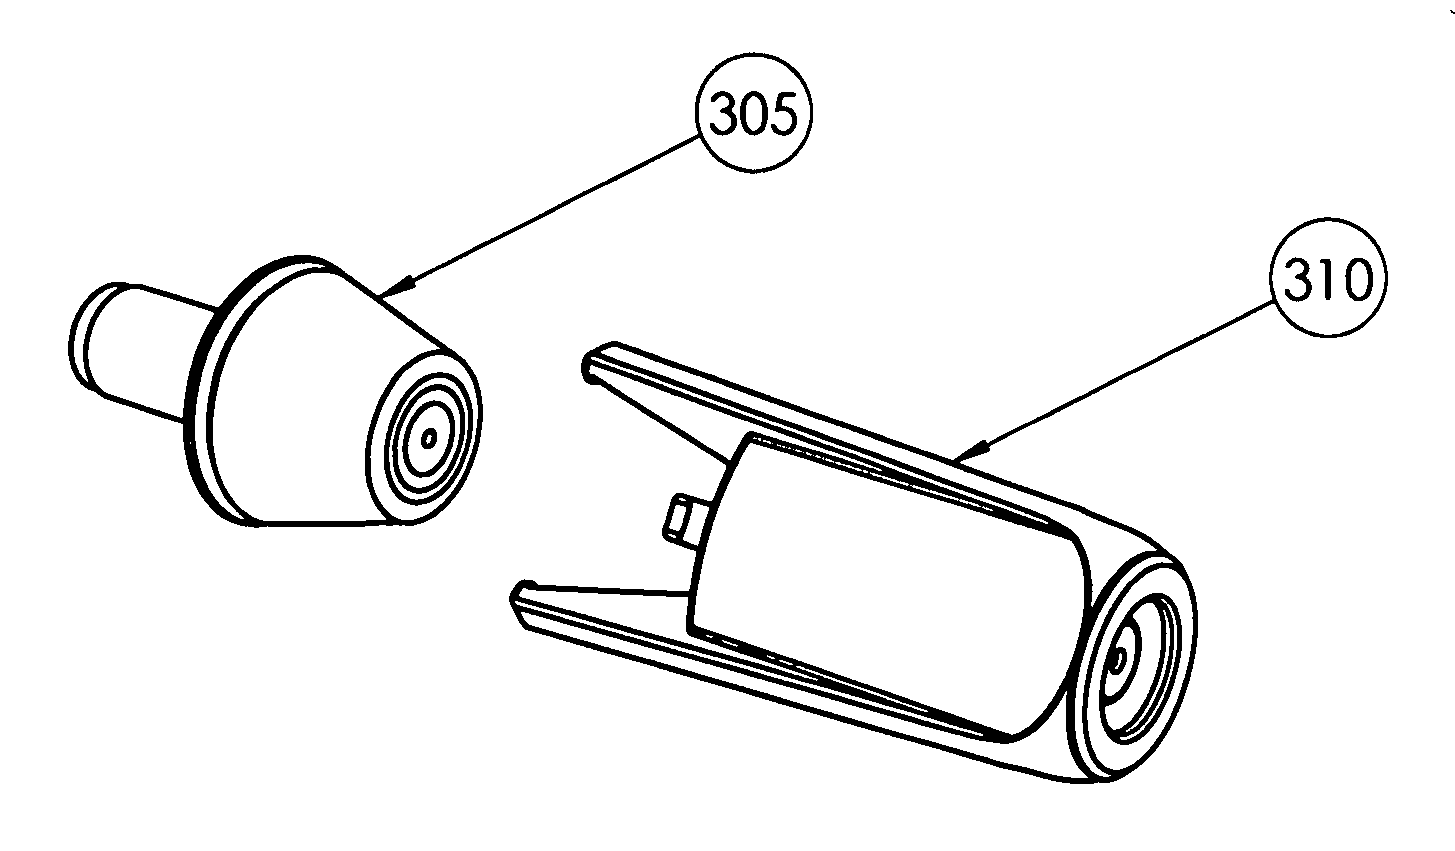 Releasable Connector System